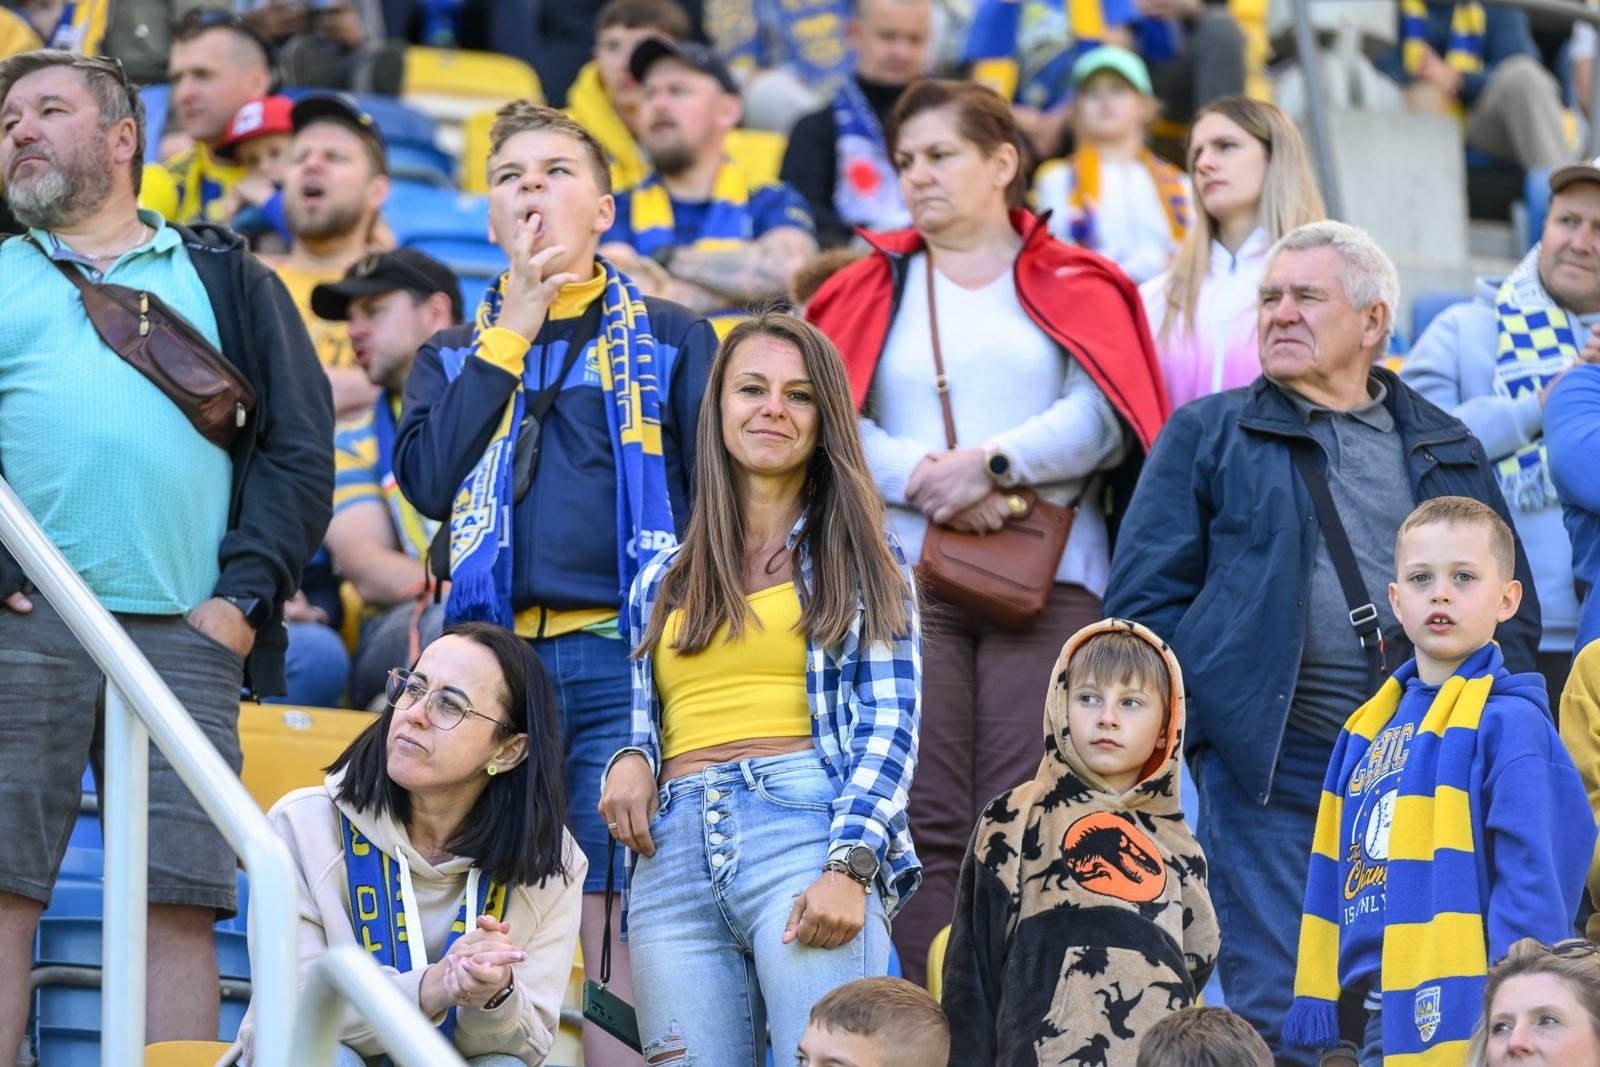 Arka Gdynia – Zagłębie Sosnowiec: Almost 10 tysiąc fans watched the victory. Were you at the match? Find yourself in the photos